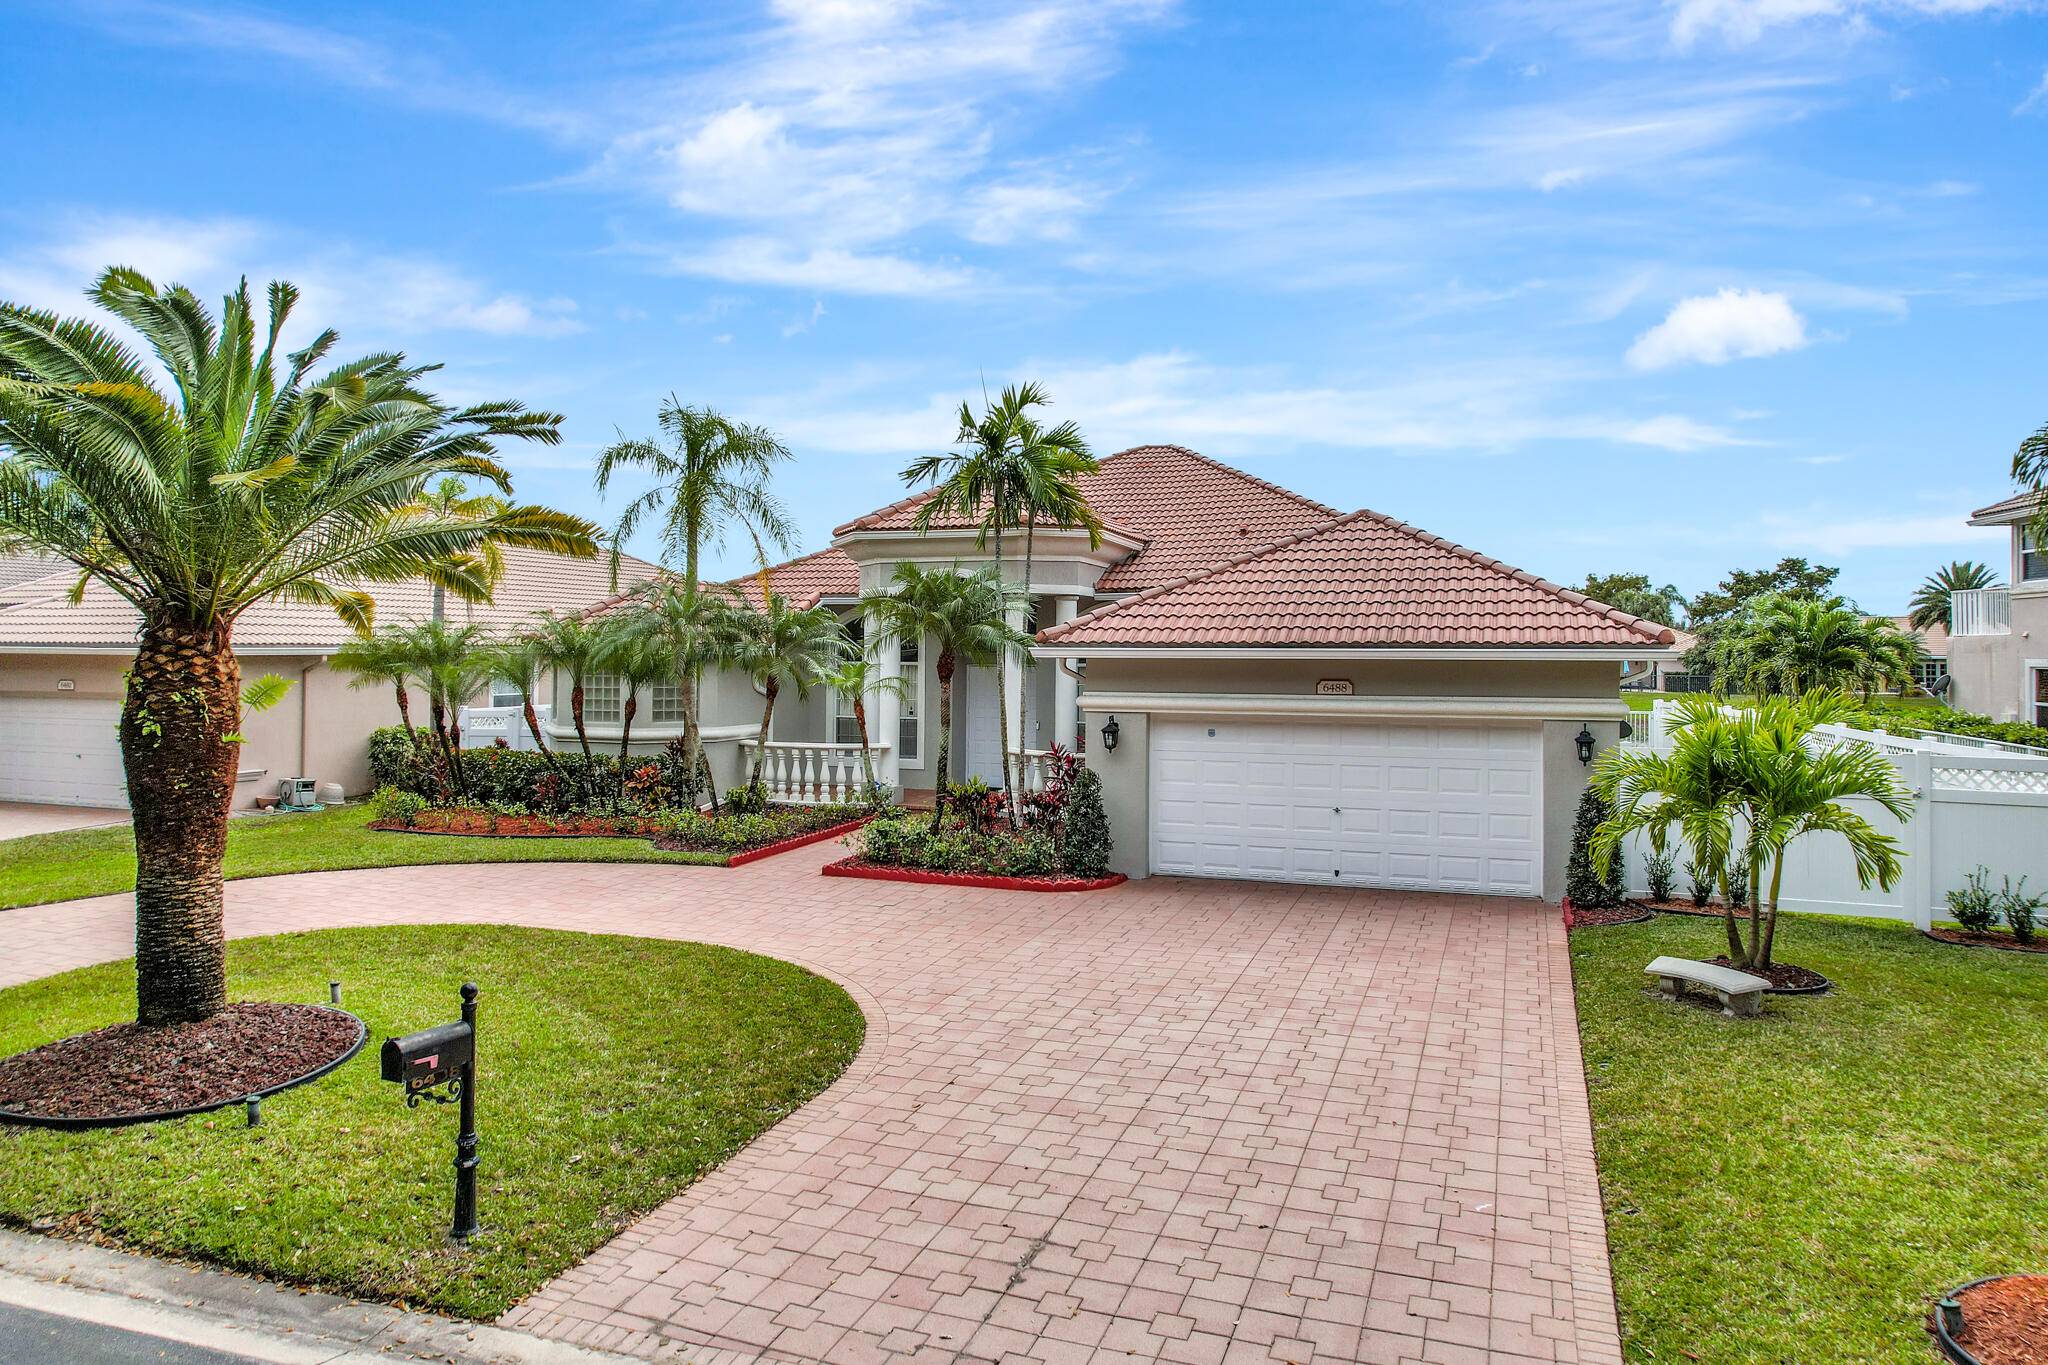 This stunning 1 story 4 bedroom 3 bathroom Office is the perfect oasis for privacy, relaxation and entertaining Lakefront Pool home in 24 hours manned gated inside Grand Reserved community ...